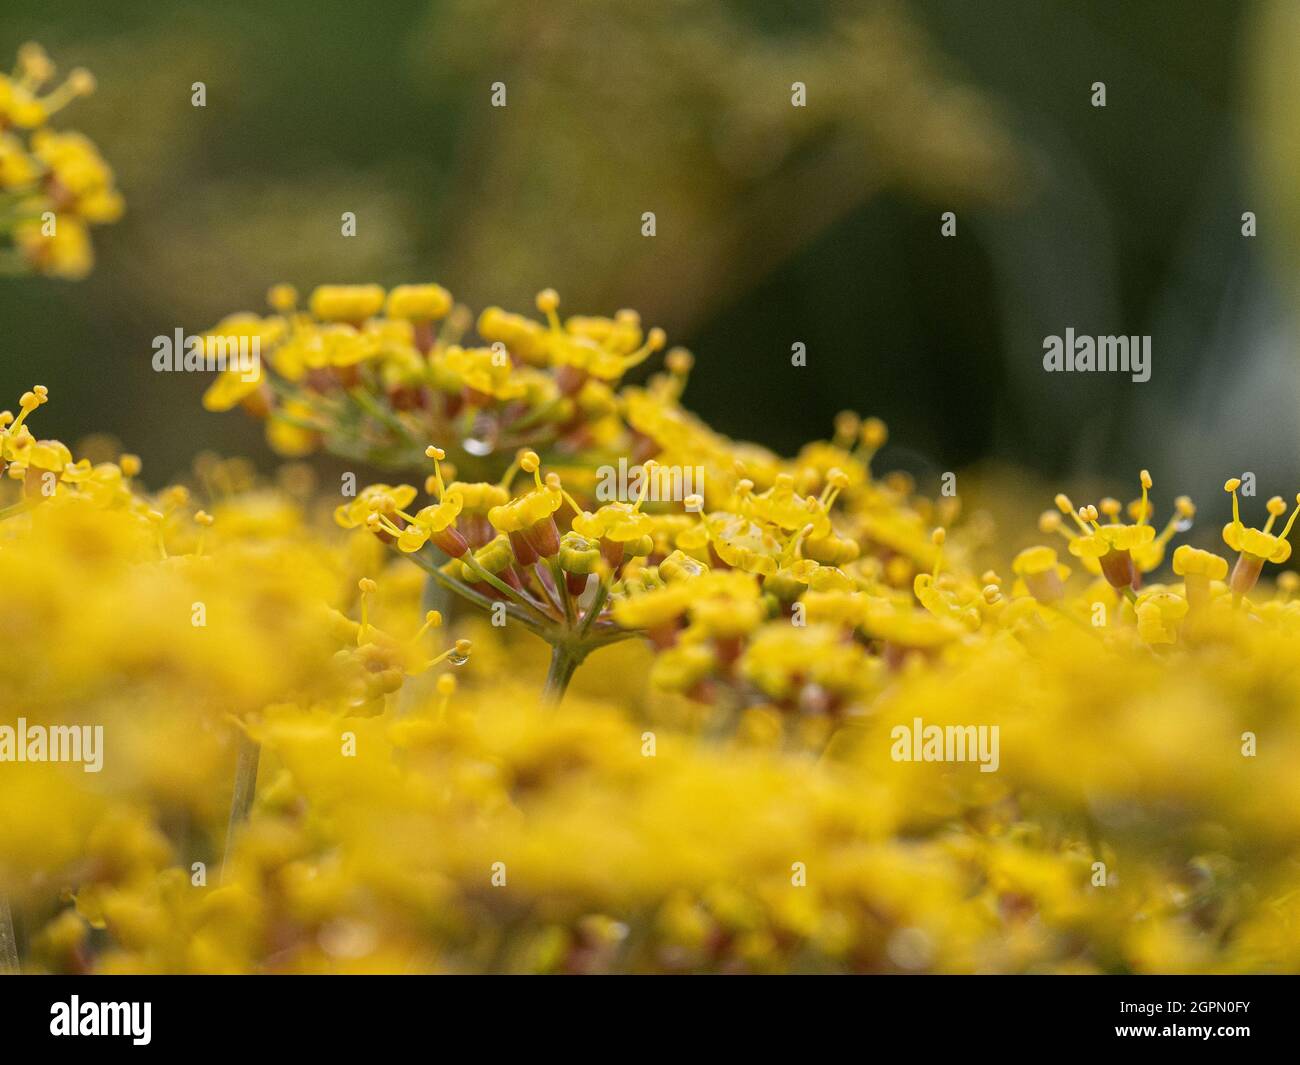 A close up of the mustard yellow florets of bronze fennel Stock Photo